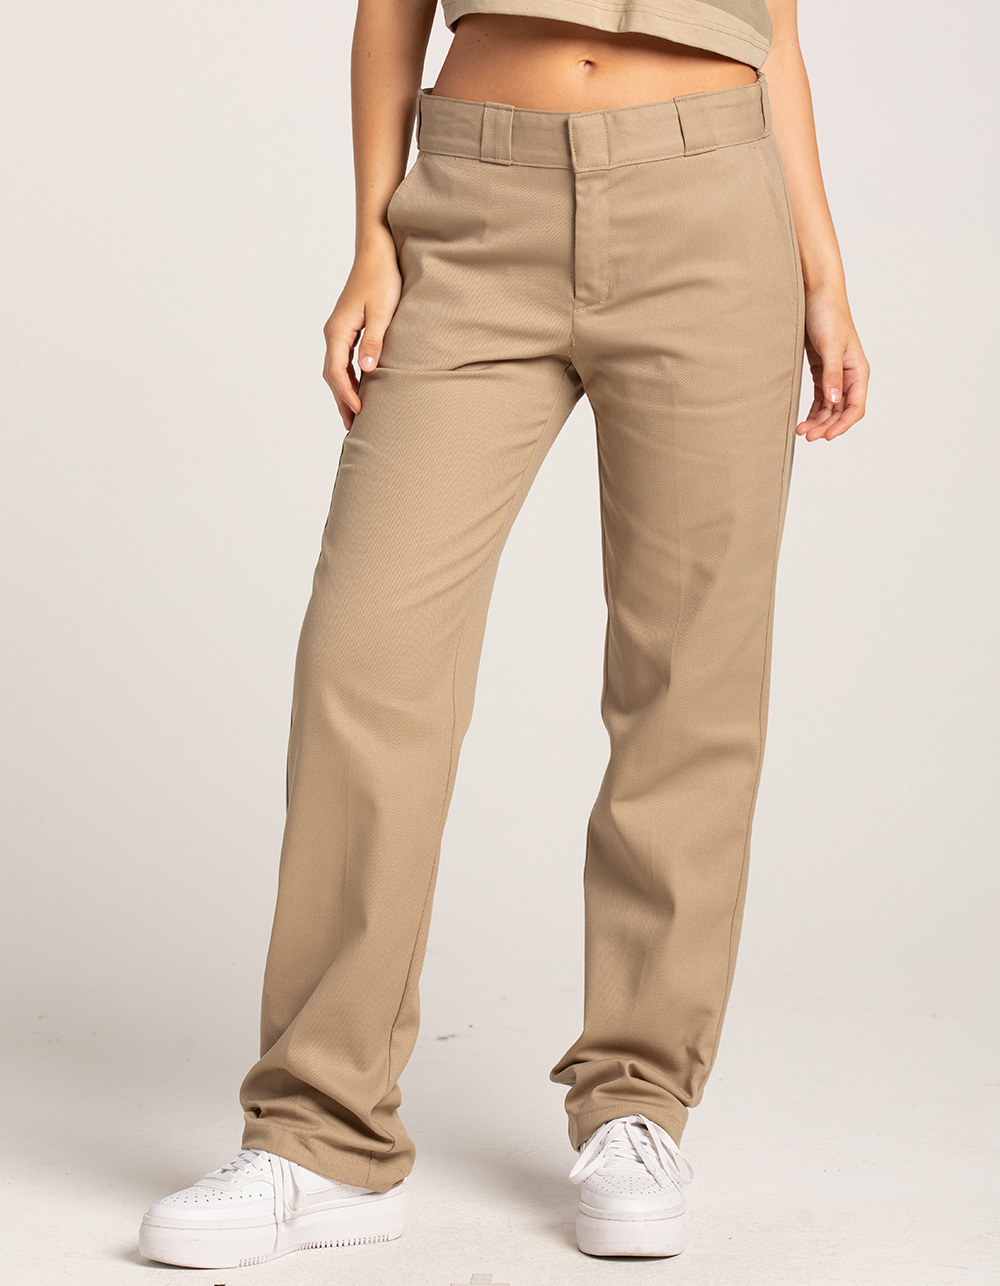 Womens Light Brown Striped a.n.a. Flat Front Khaki Pants Size 8 Tall very  good